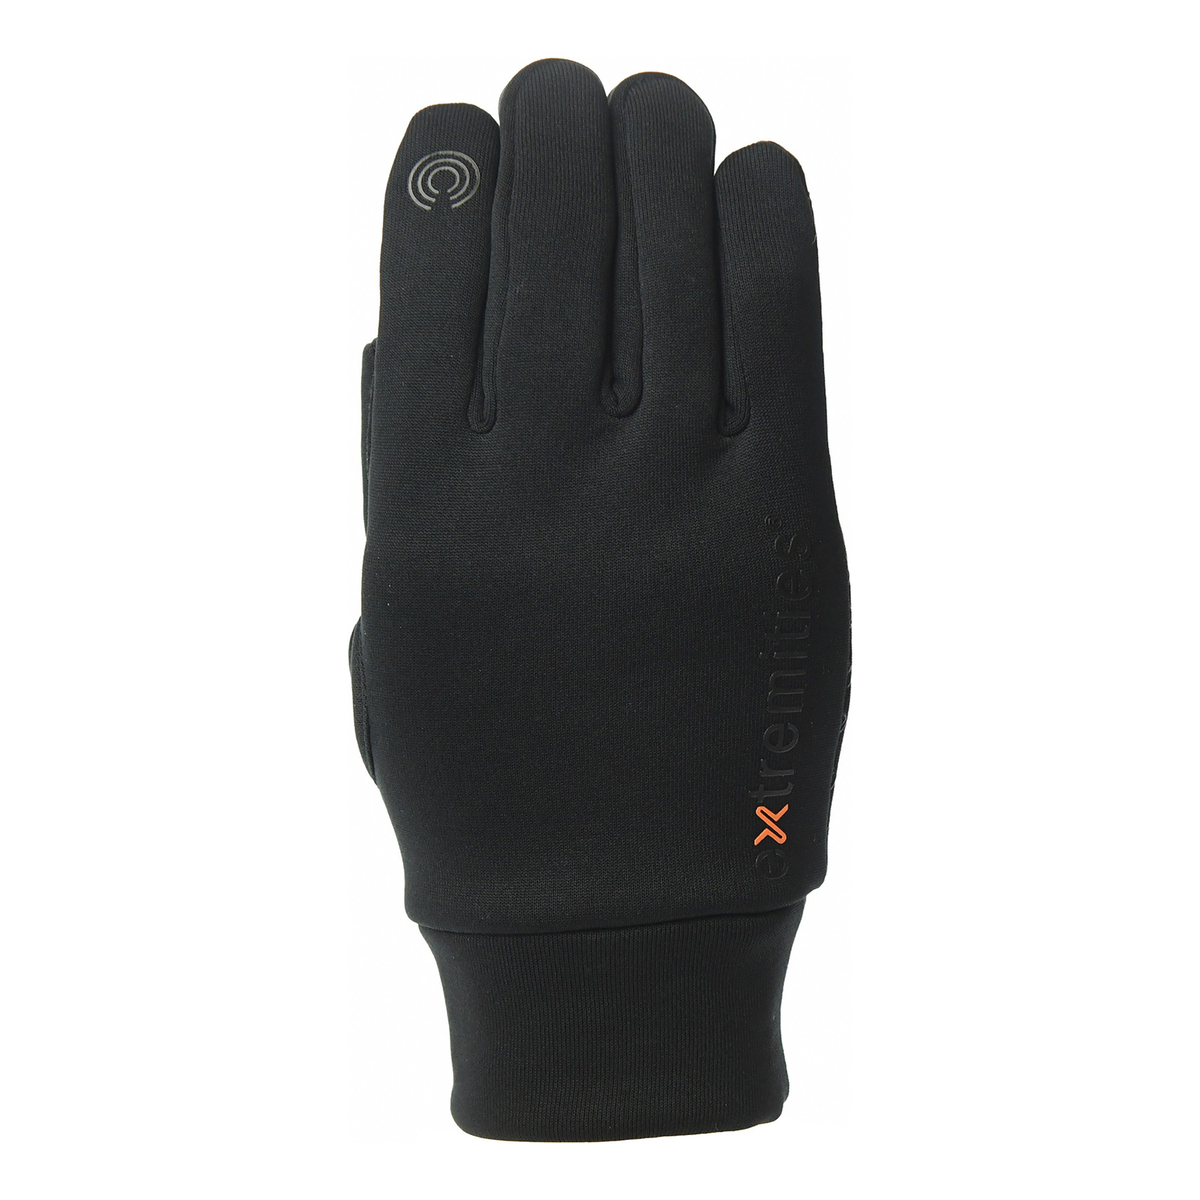 Extremities Sticky Power Liner Touchscreen Glove - Black